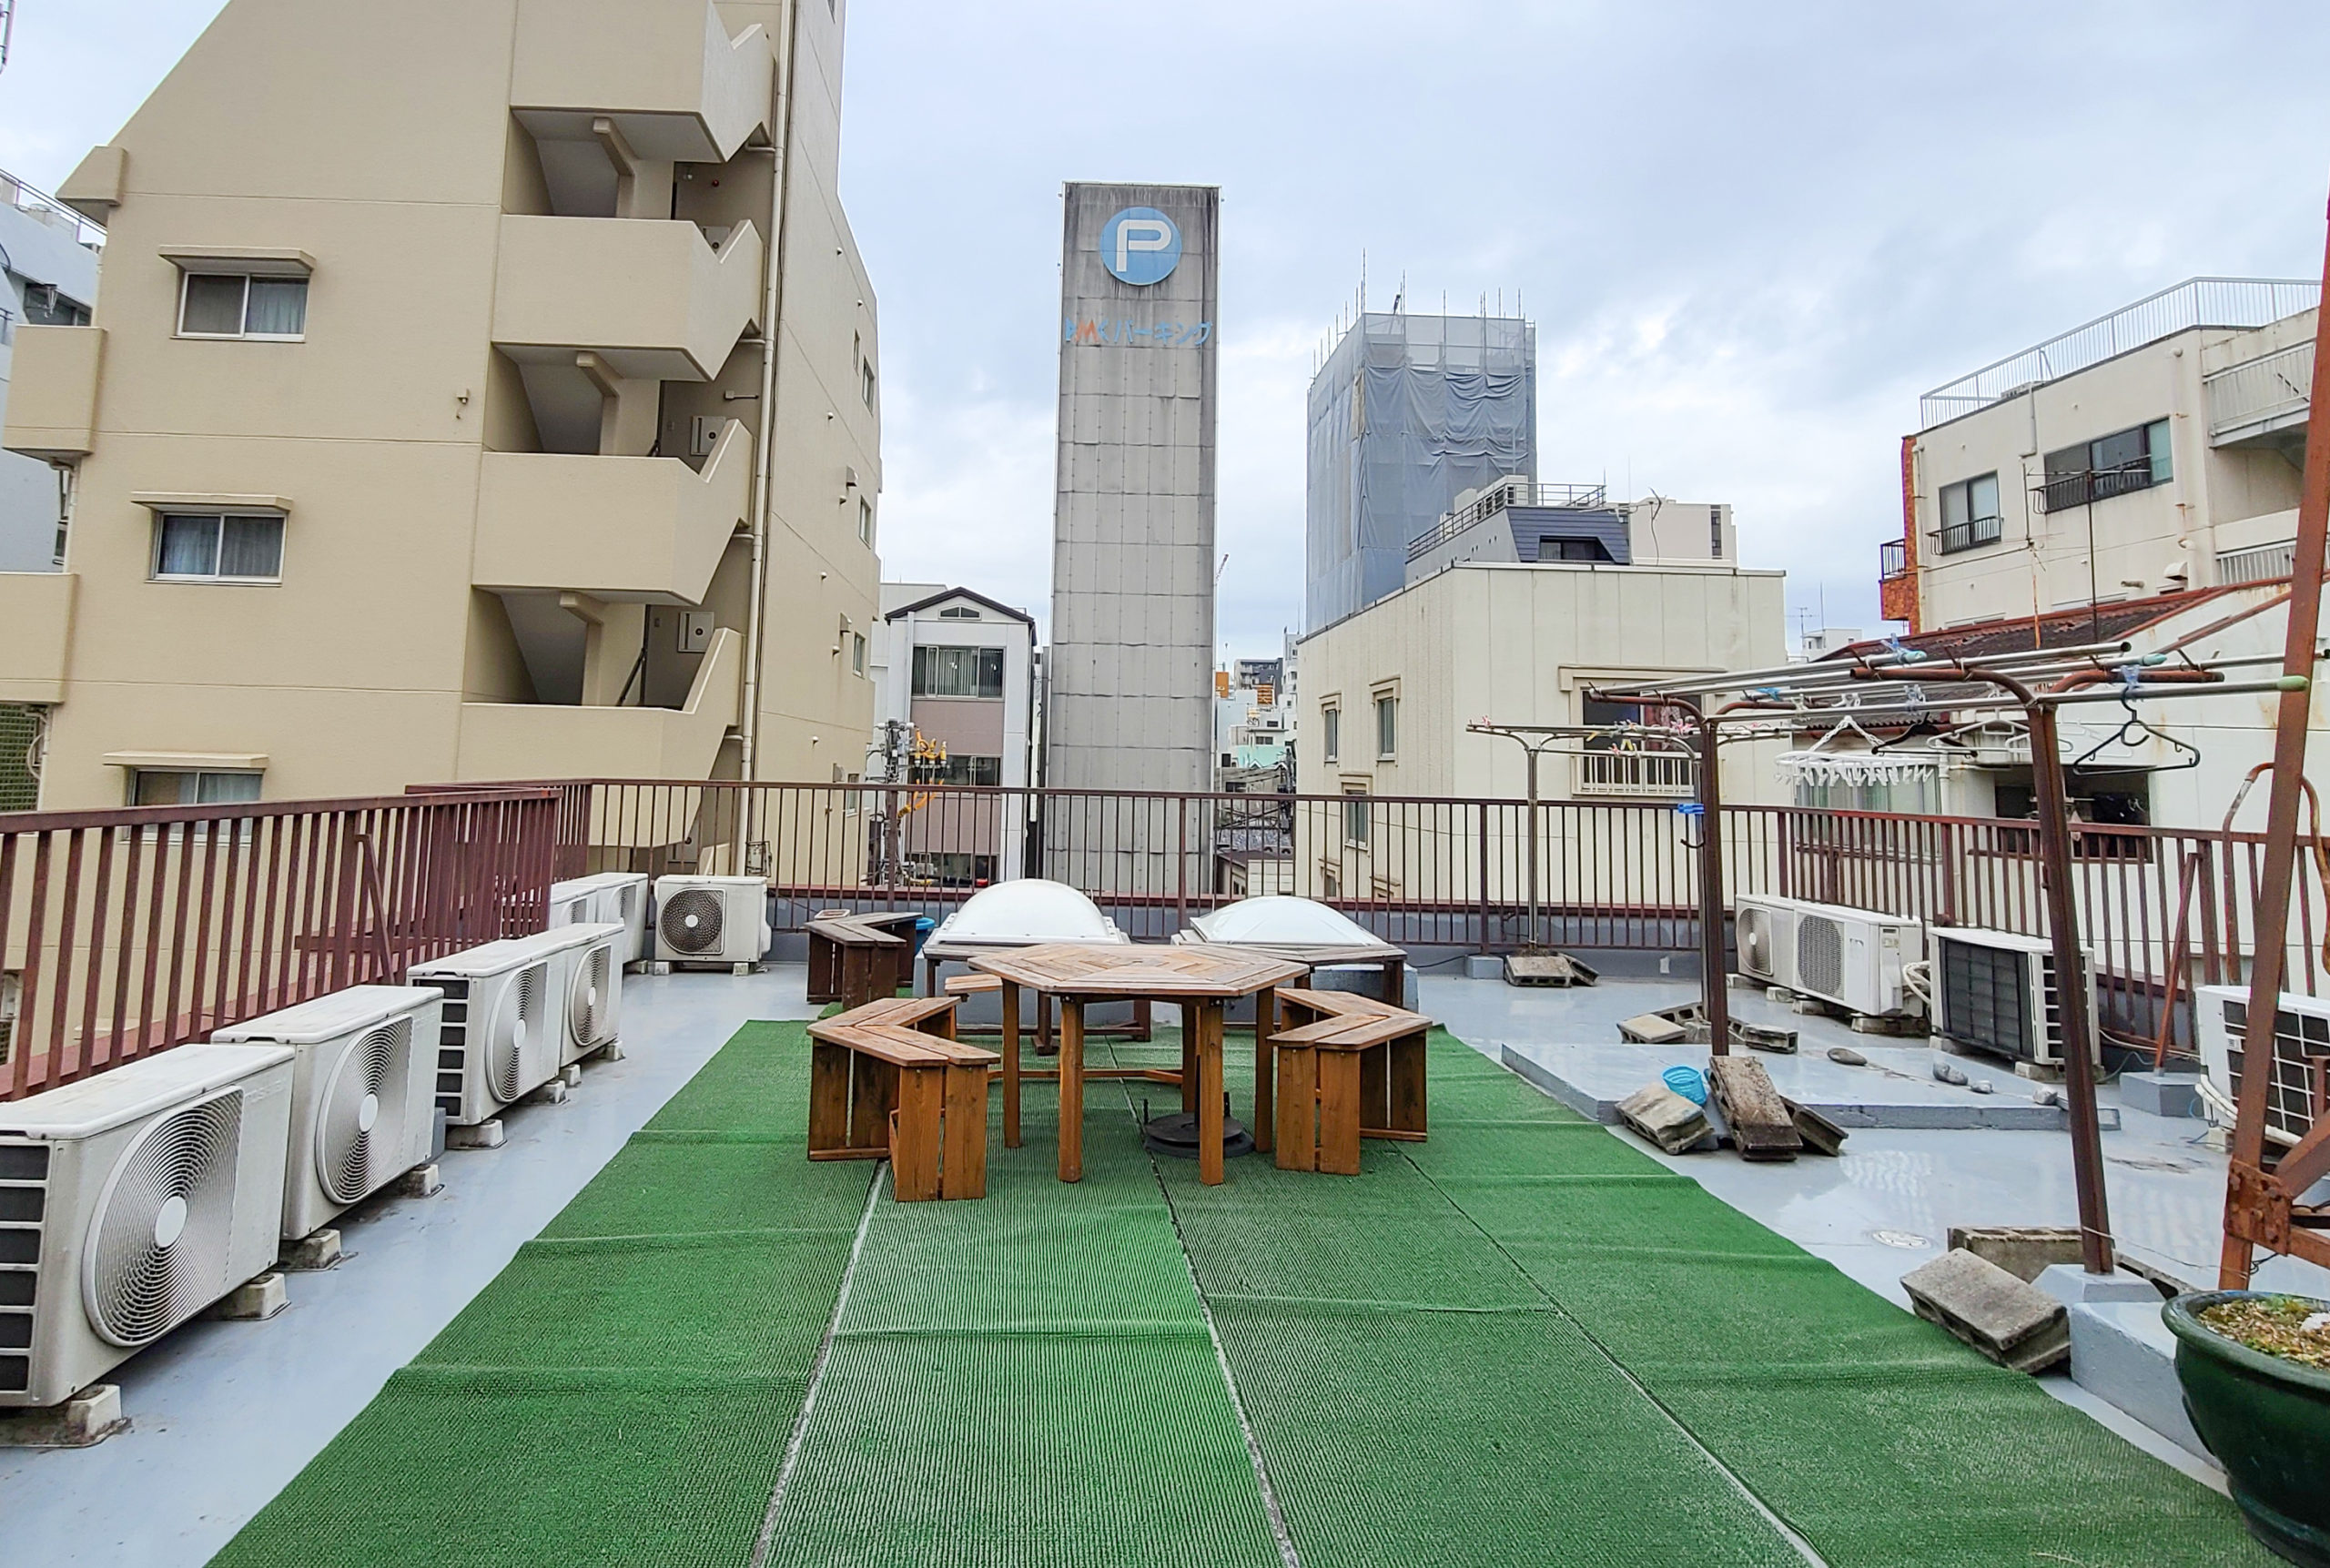 The rooftop area